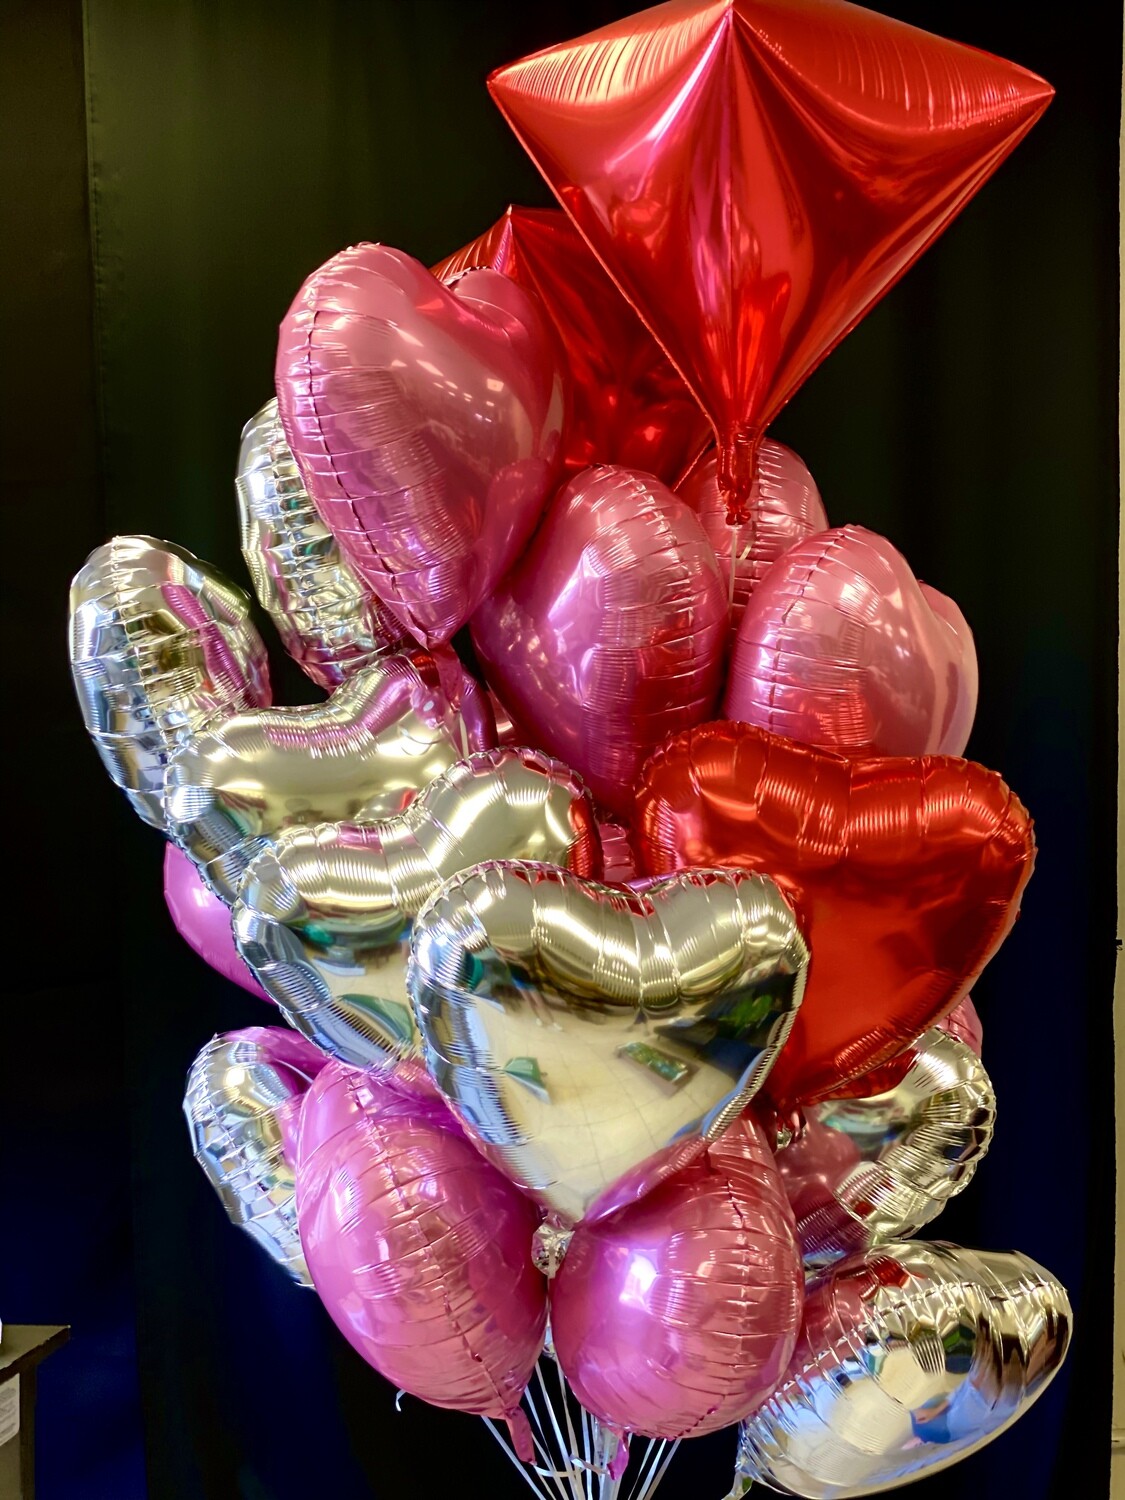 Two Dozen Silver, Red and Pink Balloons